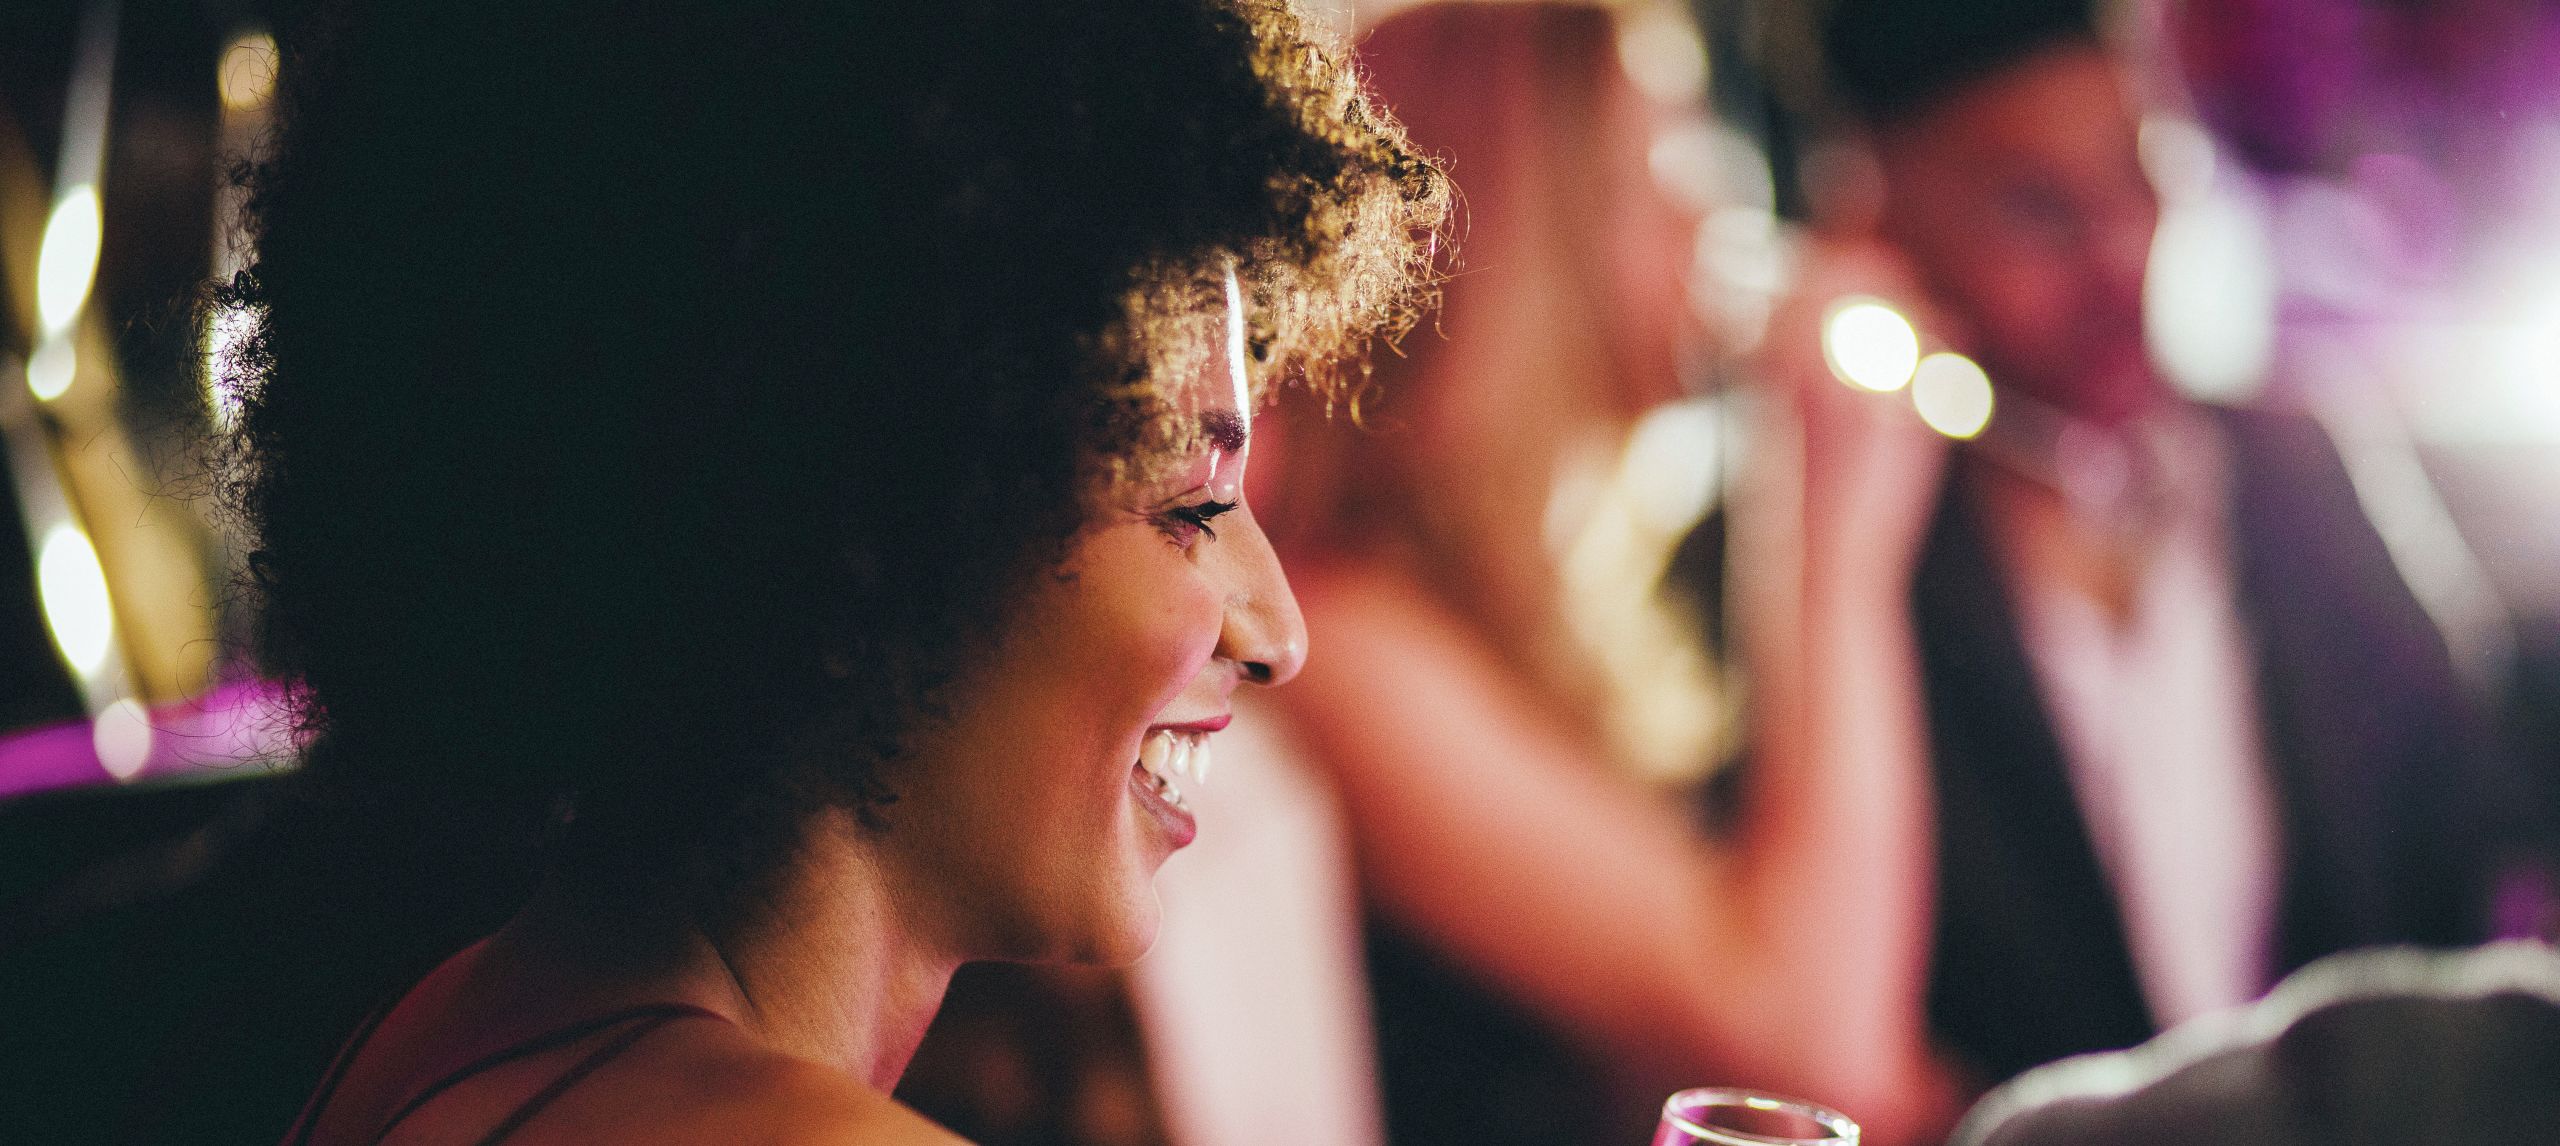 Close up shot of a woman enjoying a glass of champagne as she parties in a nightclub with her friends.